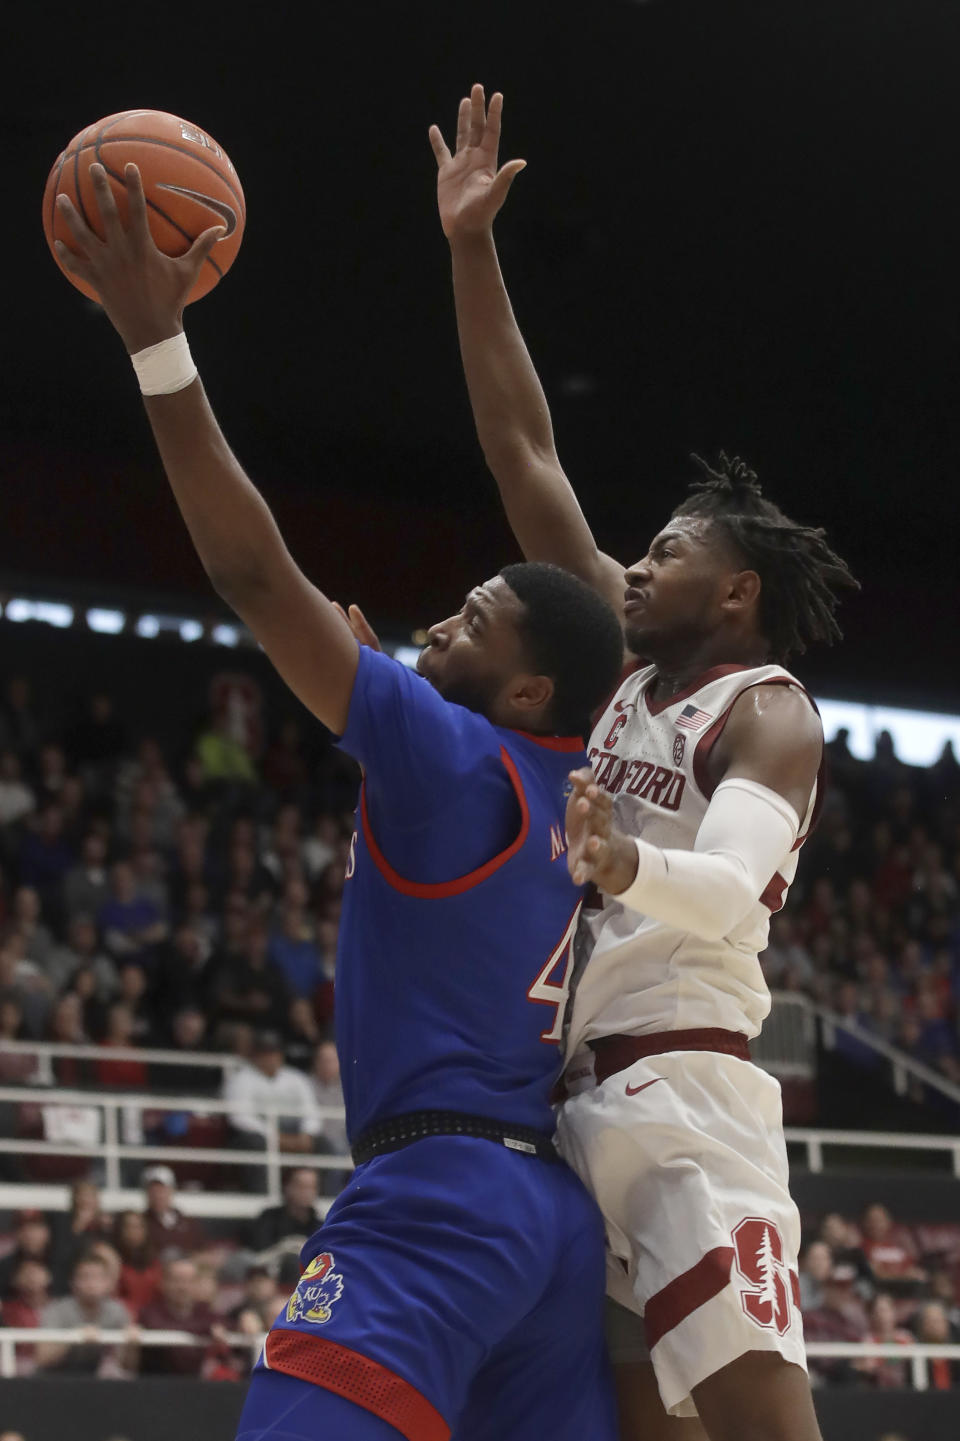 Kansas guard Isaiah Moss, left, shoots against Stanford guard Daejon Davis during the first half of an NCAA college basketball game in Stanford, Calif., Sunday, Dec. 29, 2019. (AP Photo/Jeff Chiu)